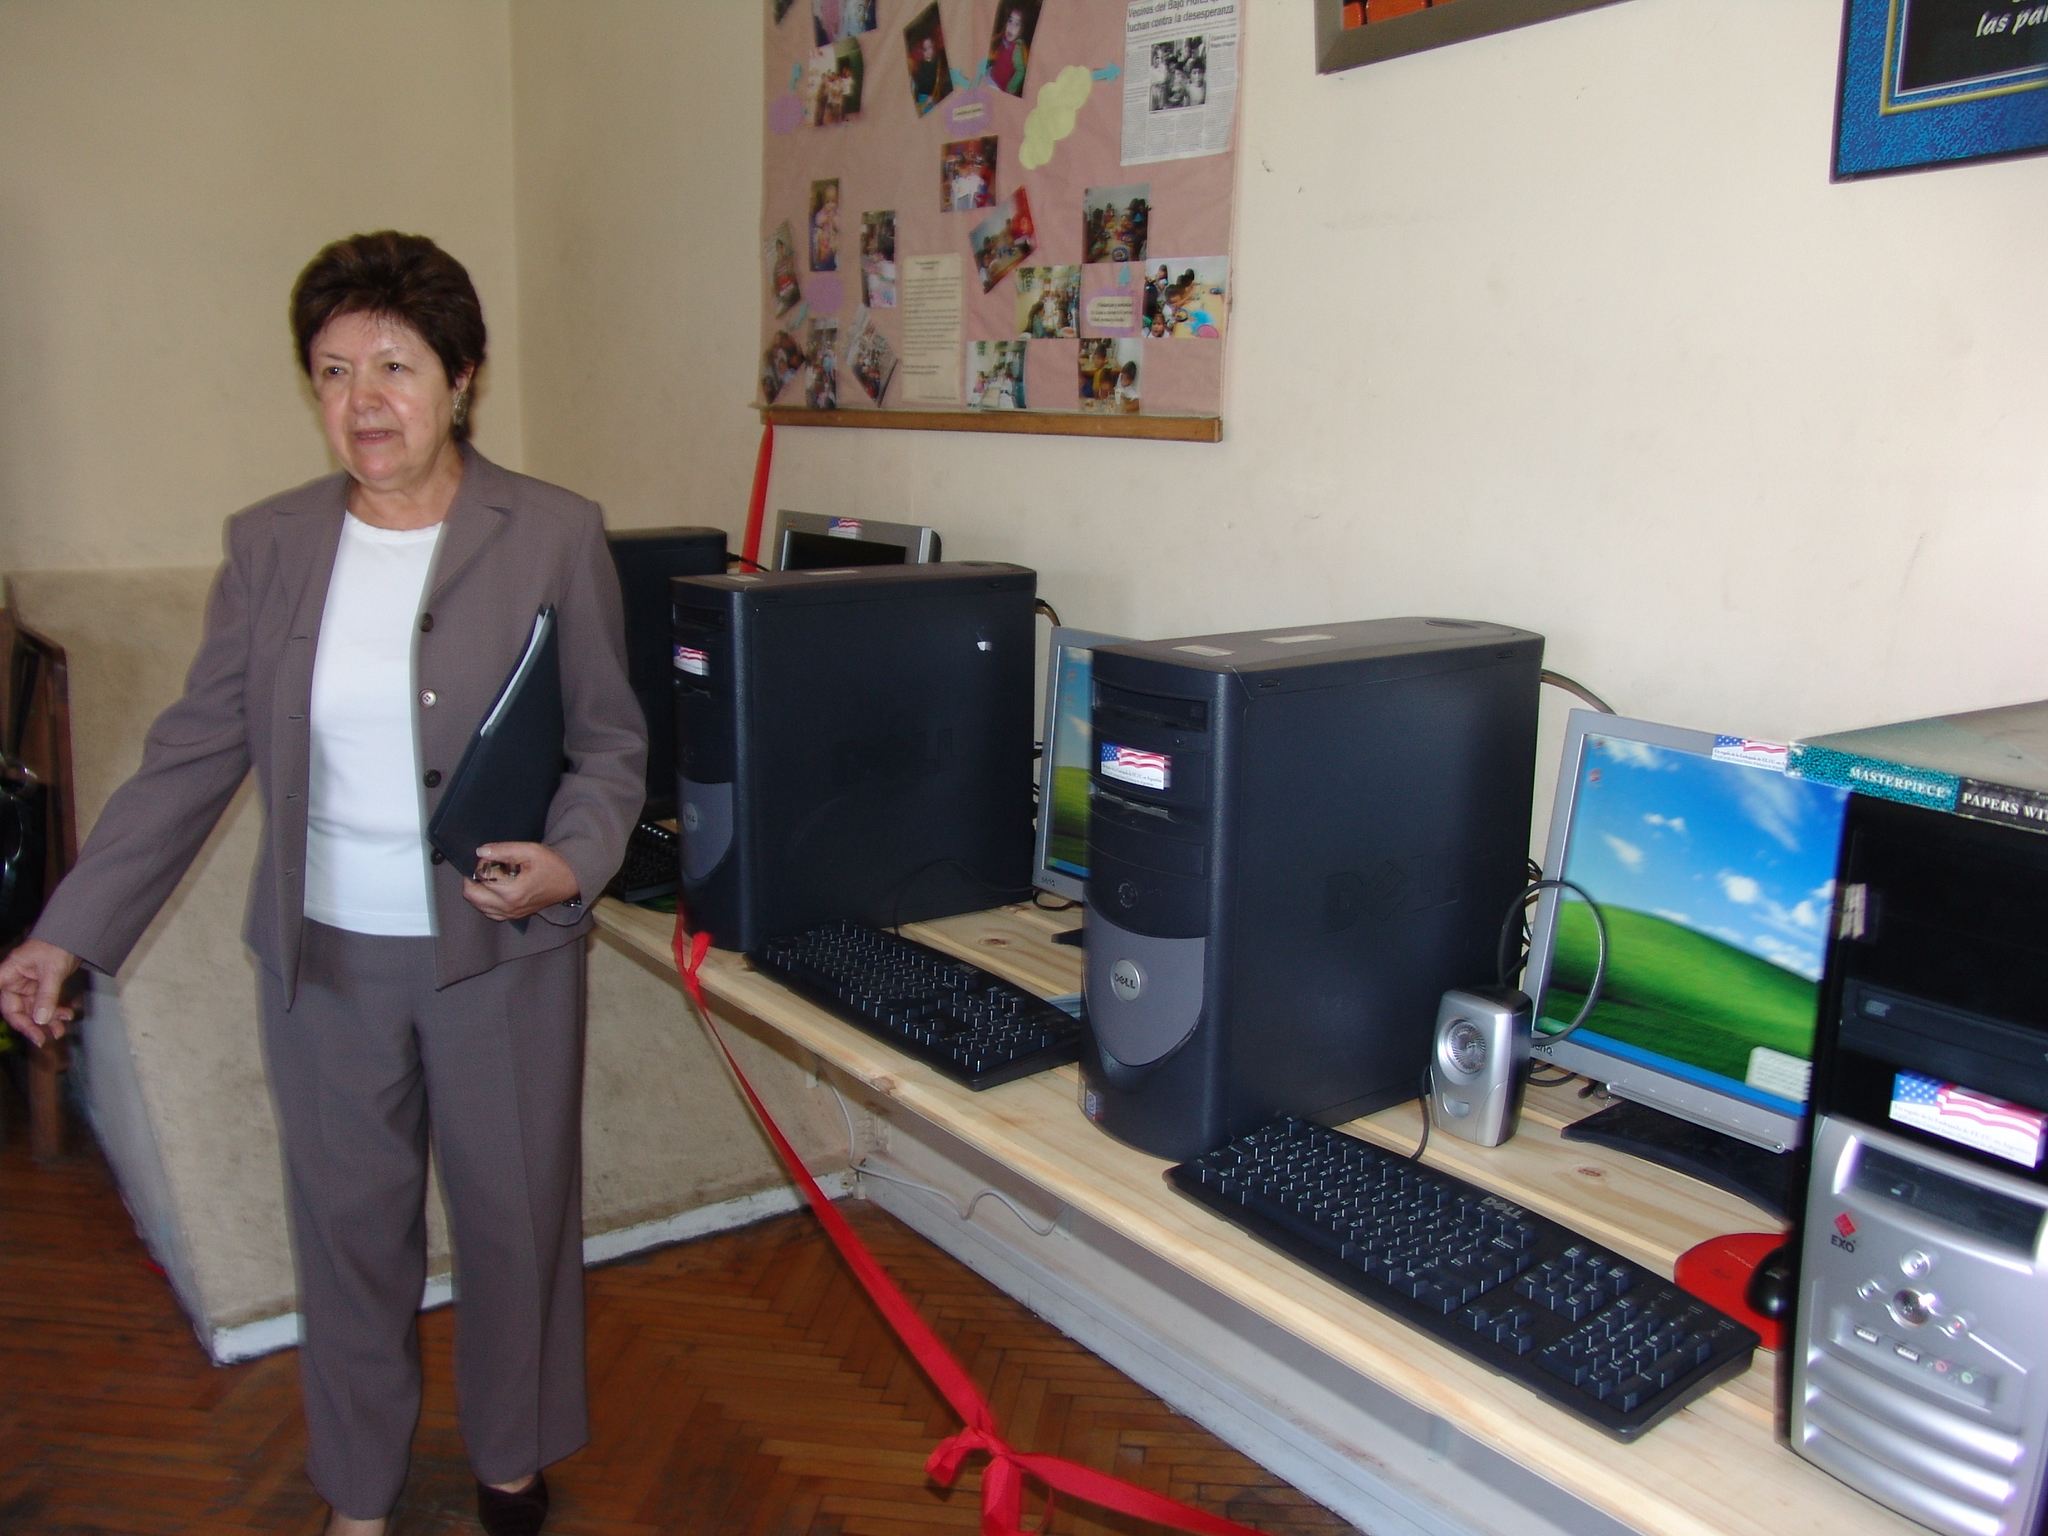 a woman is standing next to computer equipment